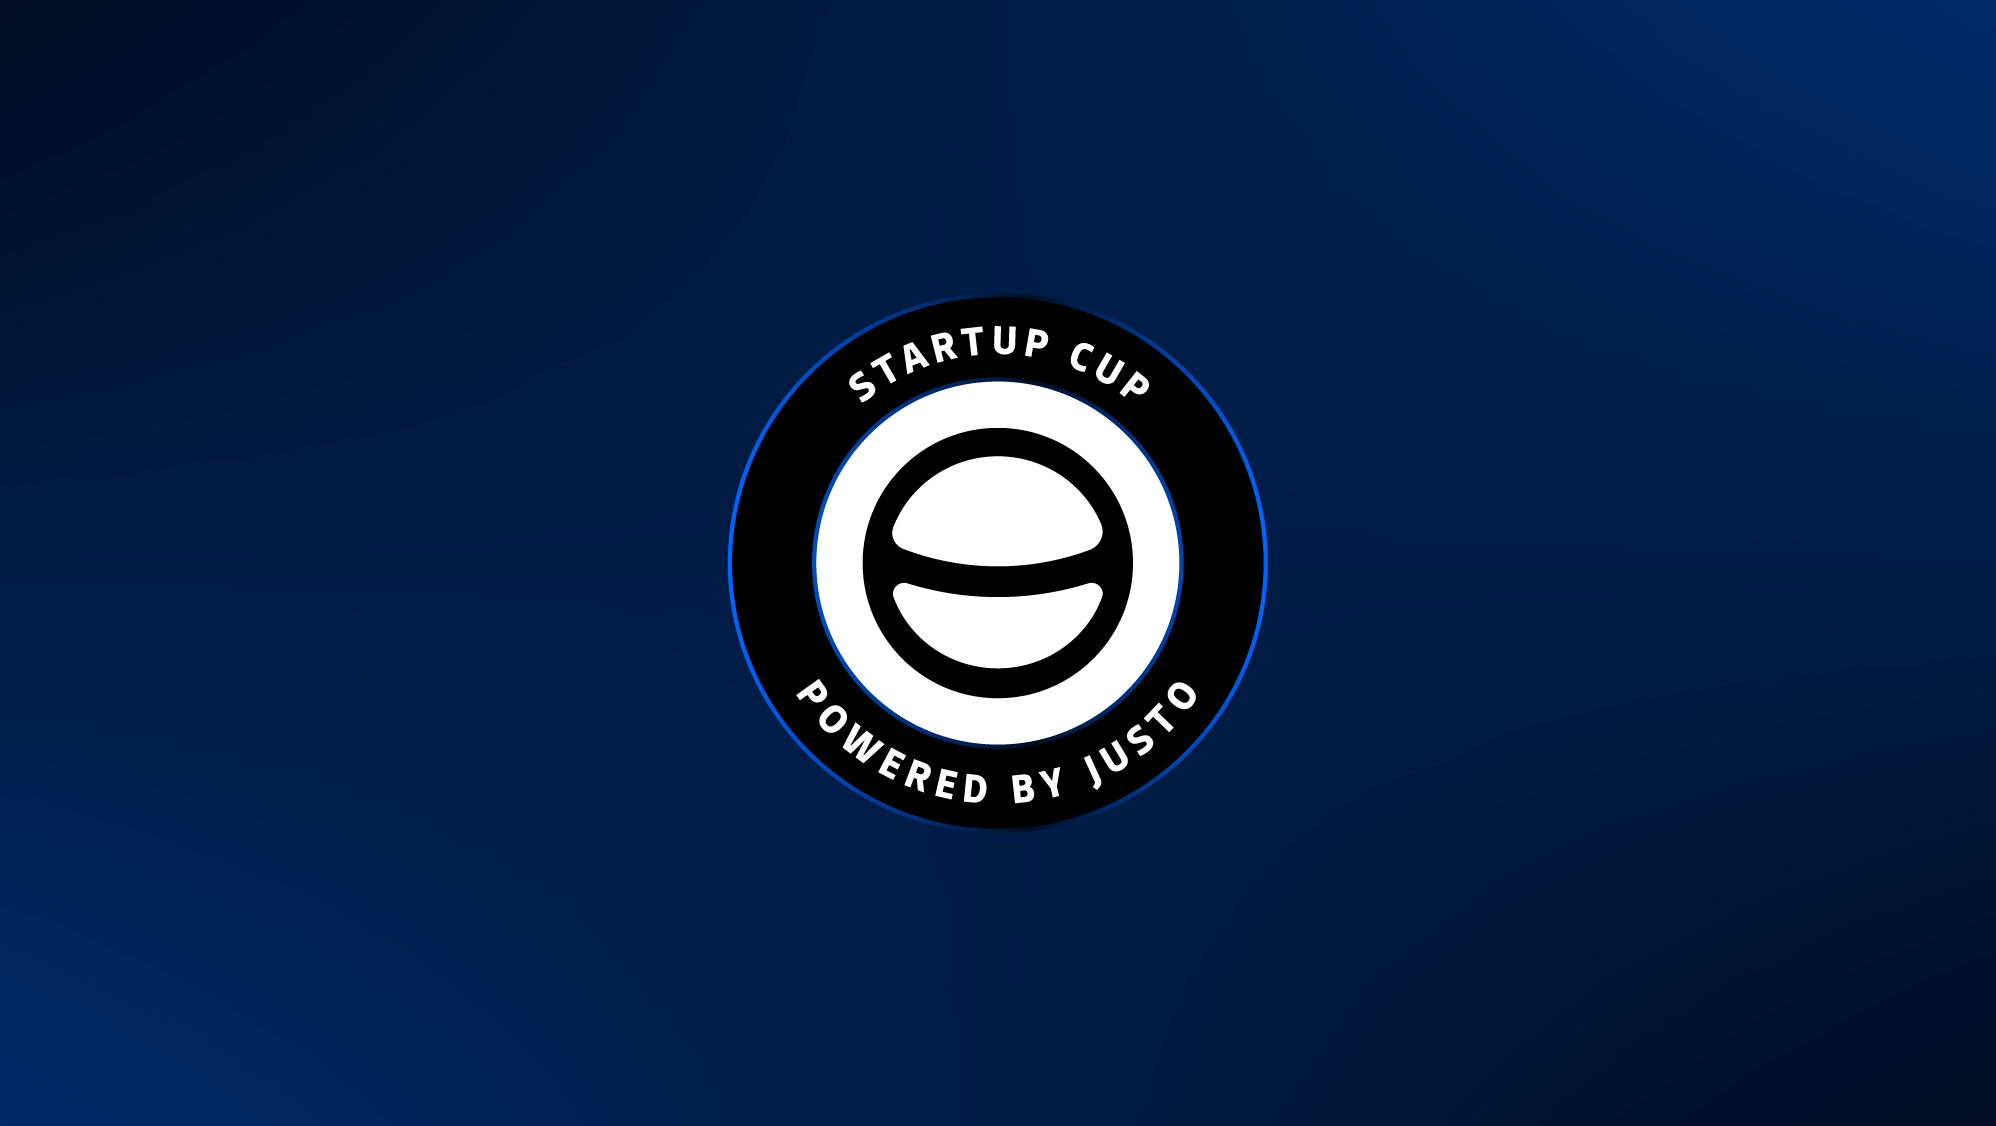 StartUp Cup by Justo Chile